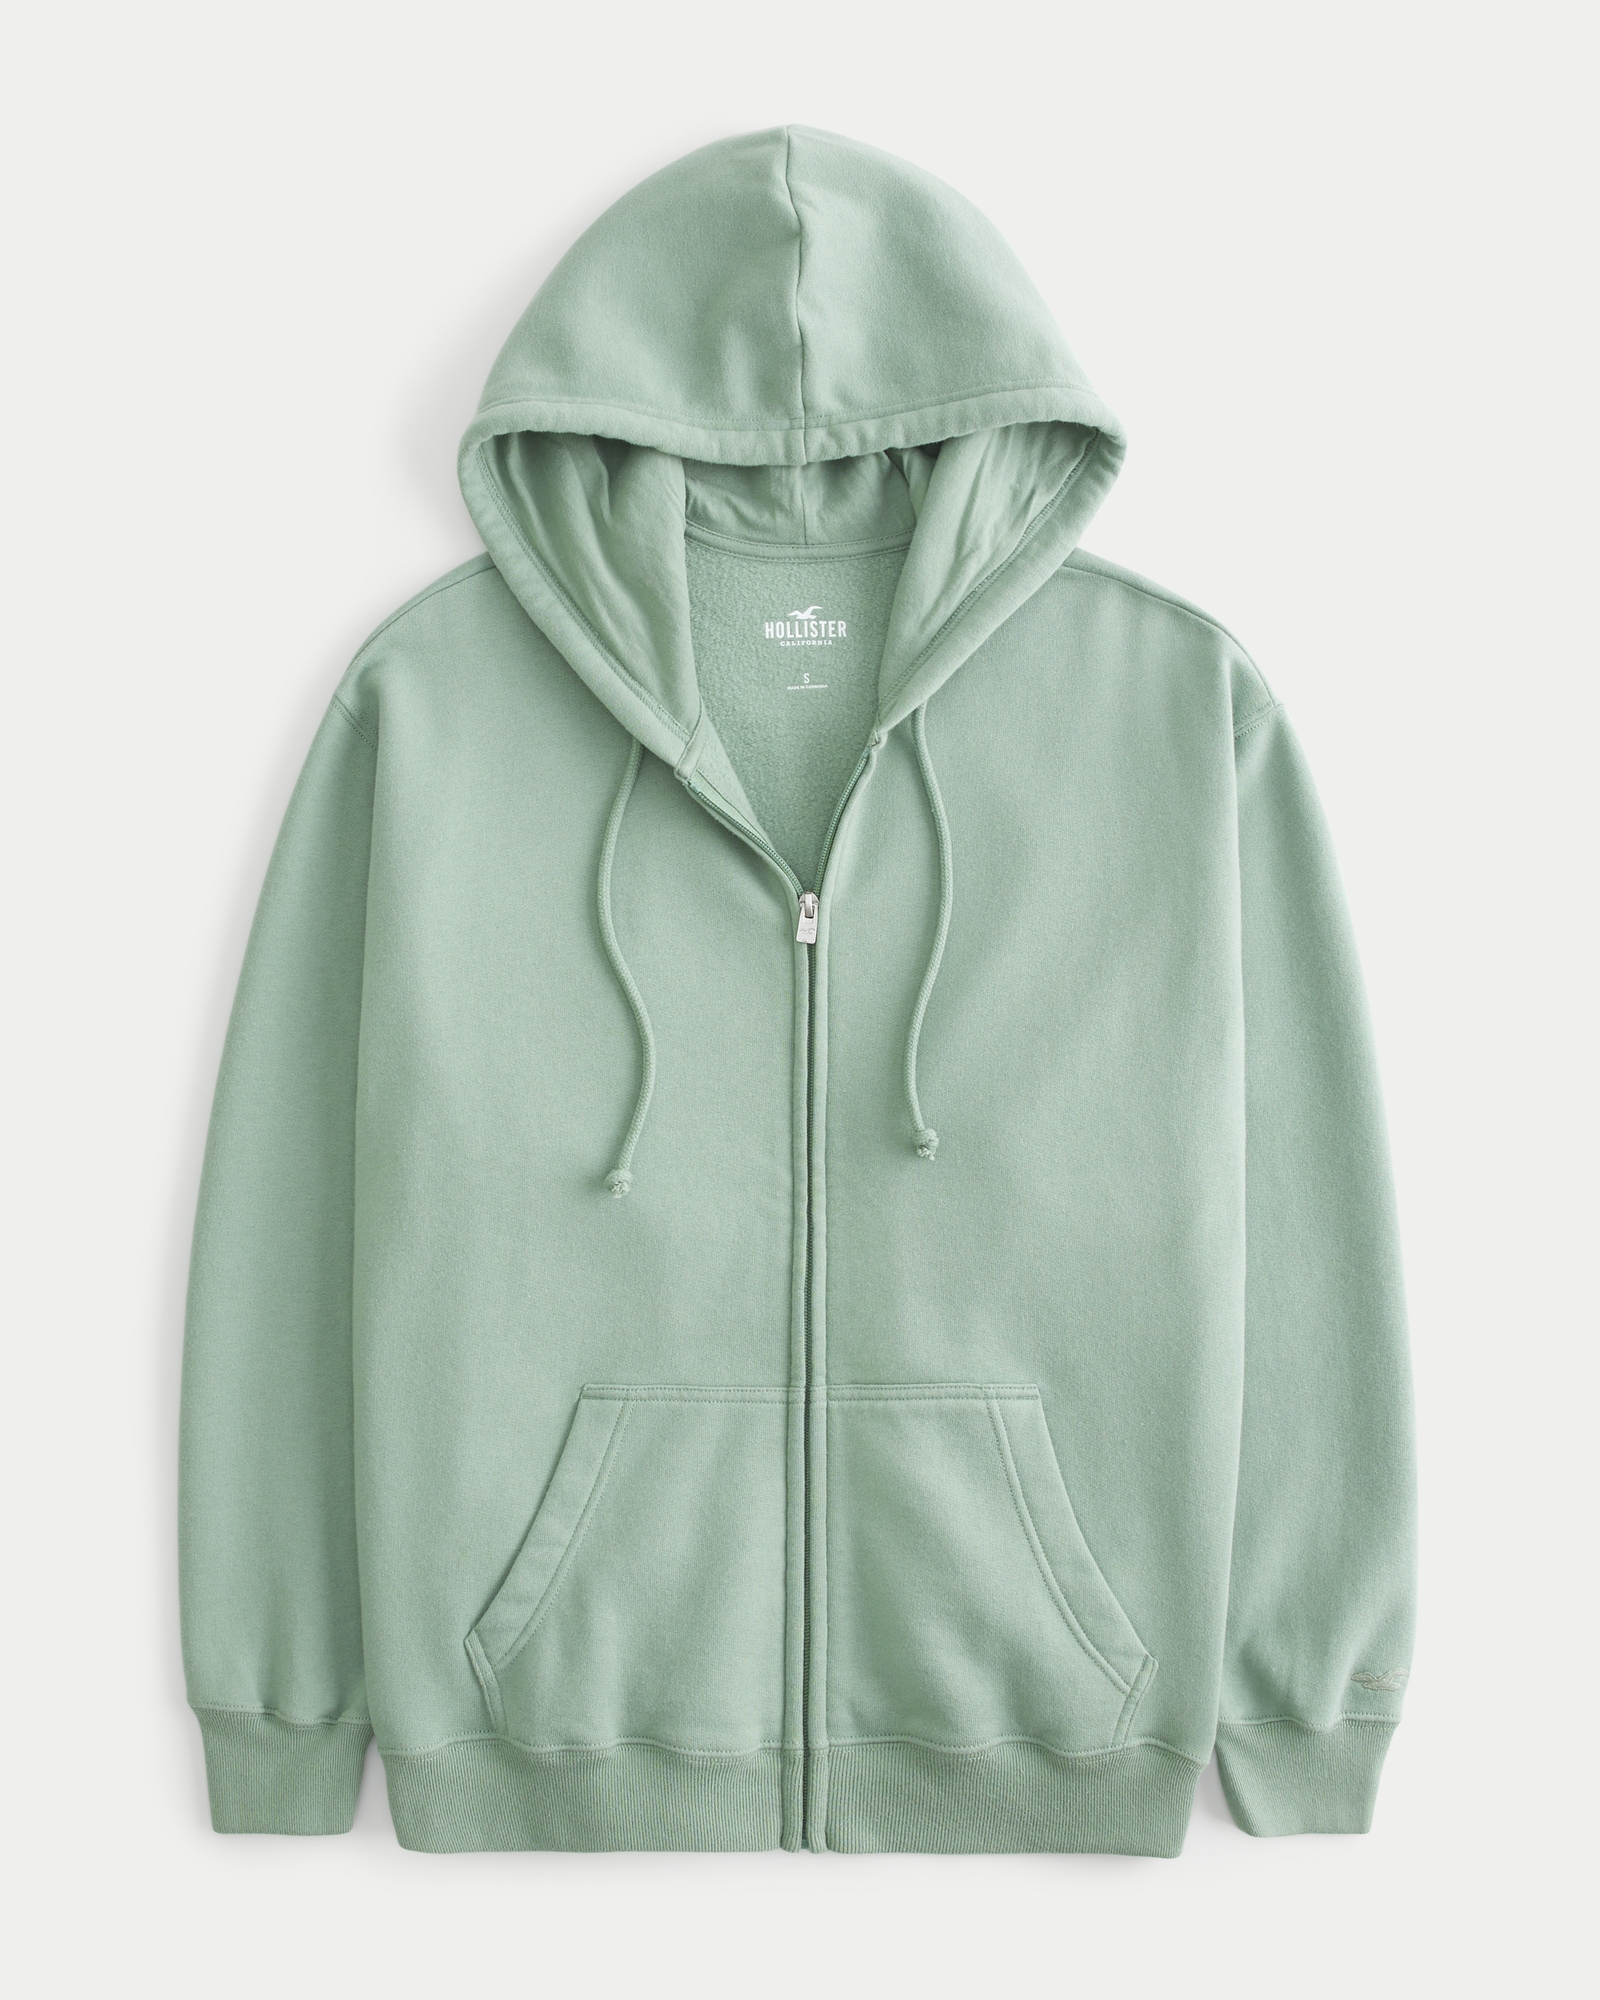 Hollister Gilly Hicks Oversized Zip-up Hoodie in Pink